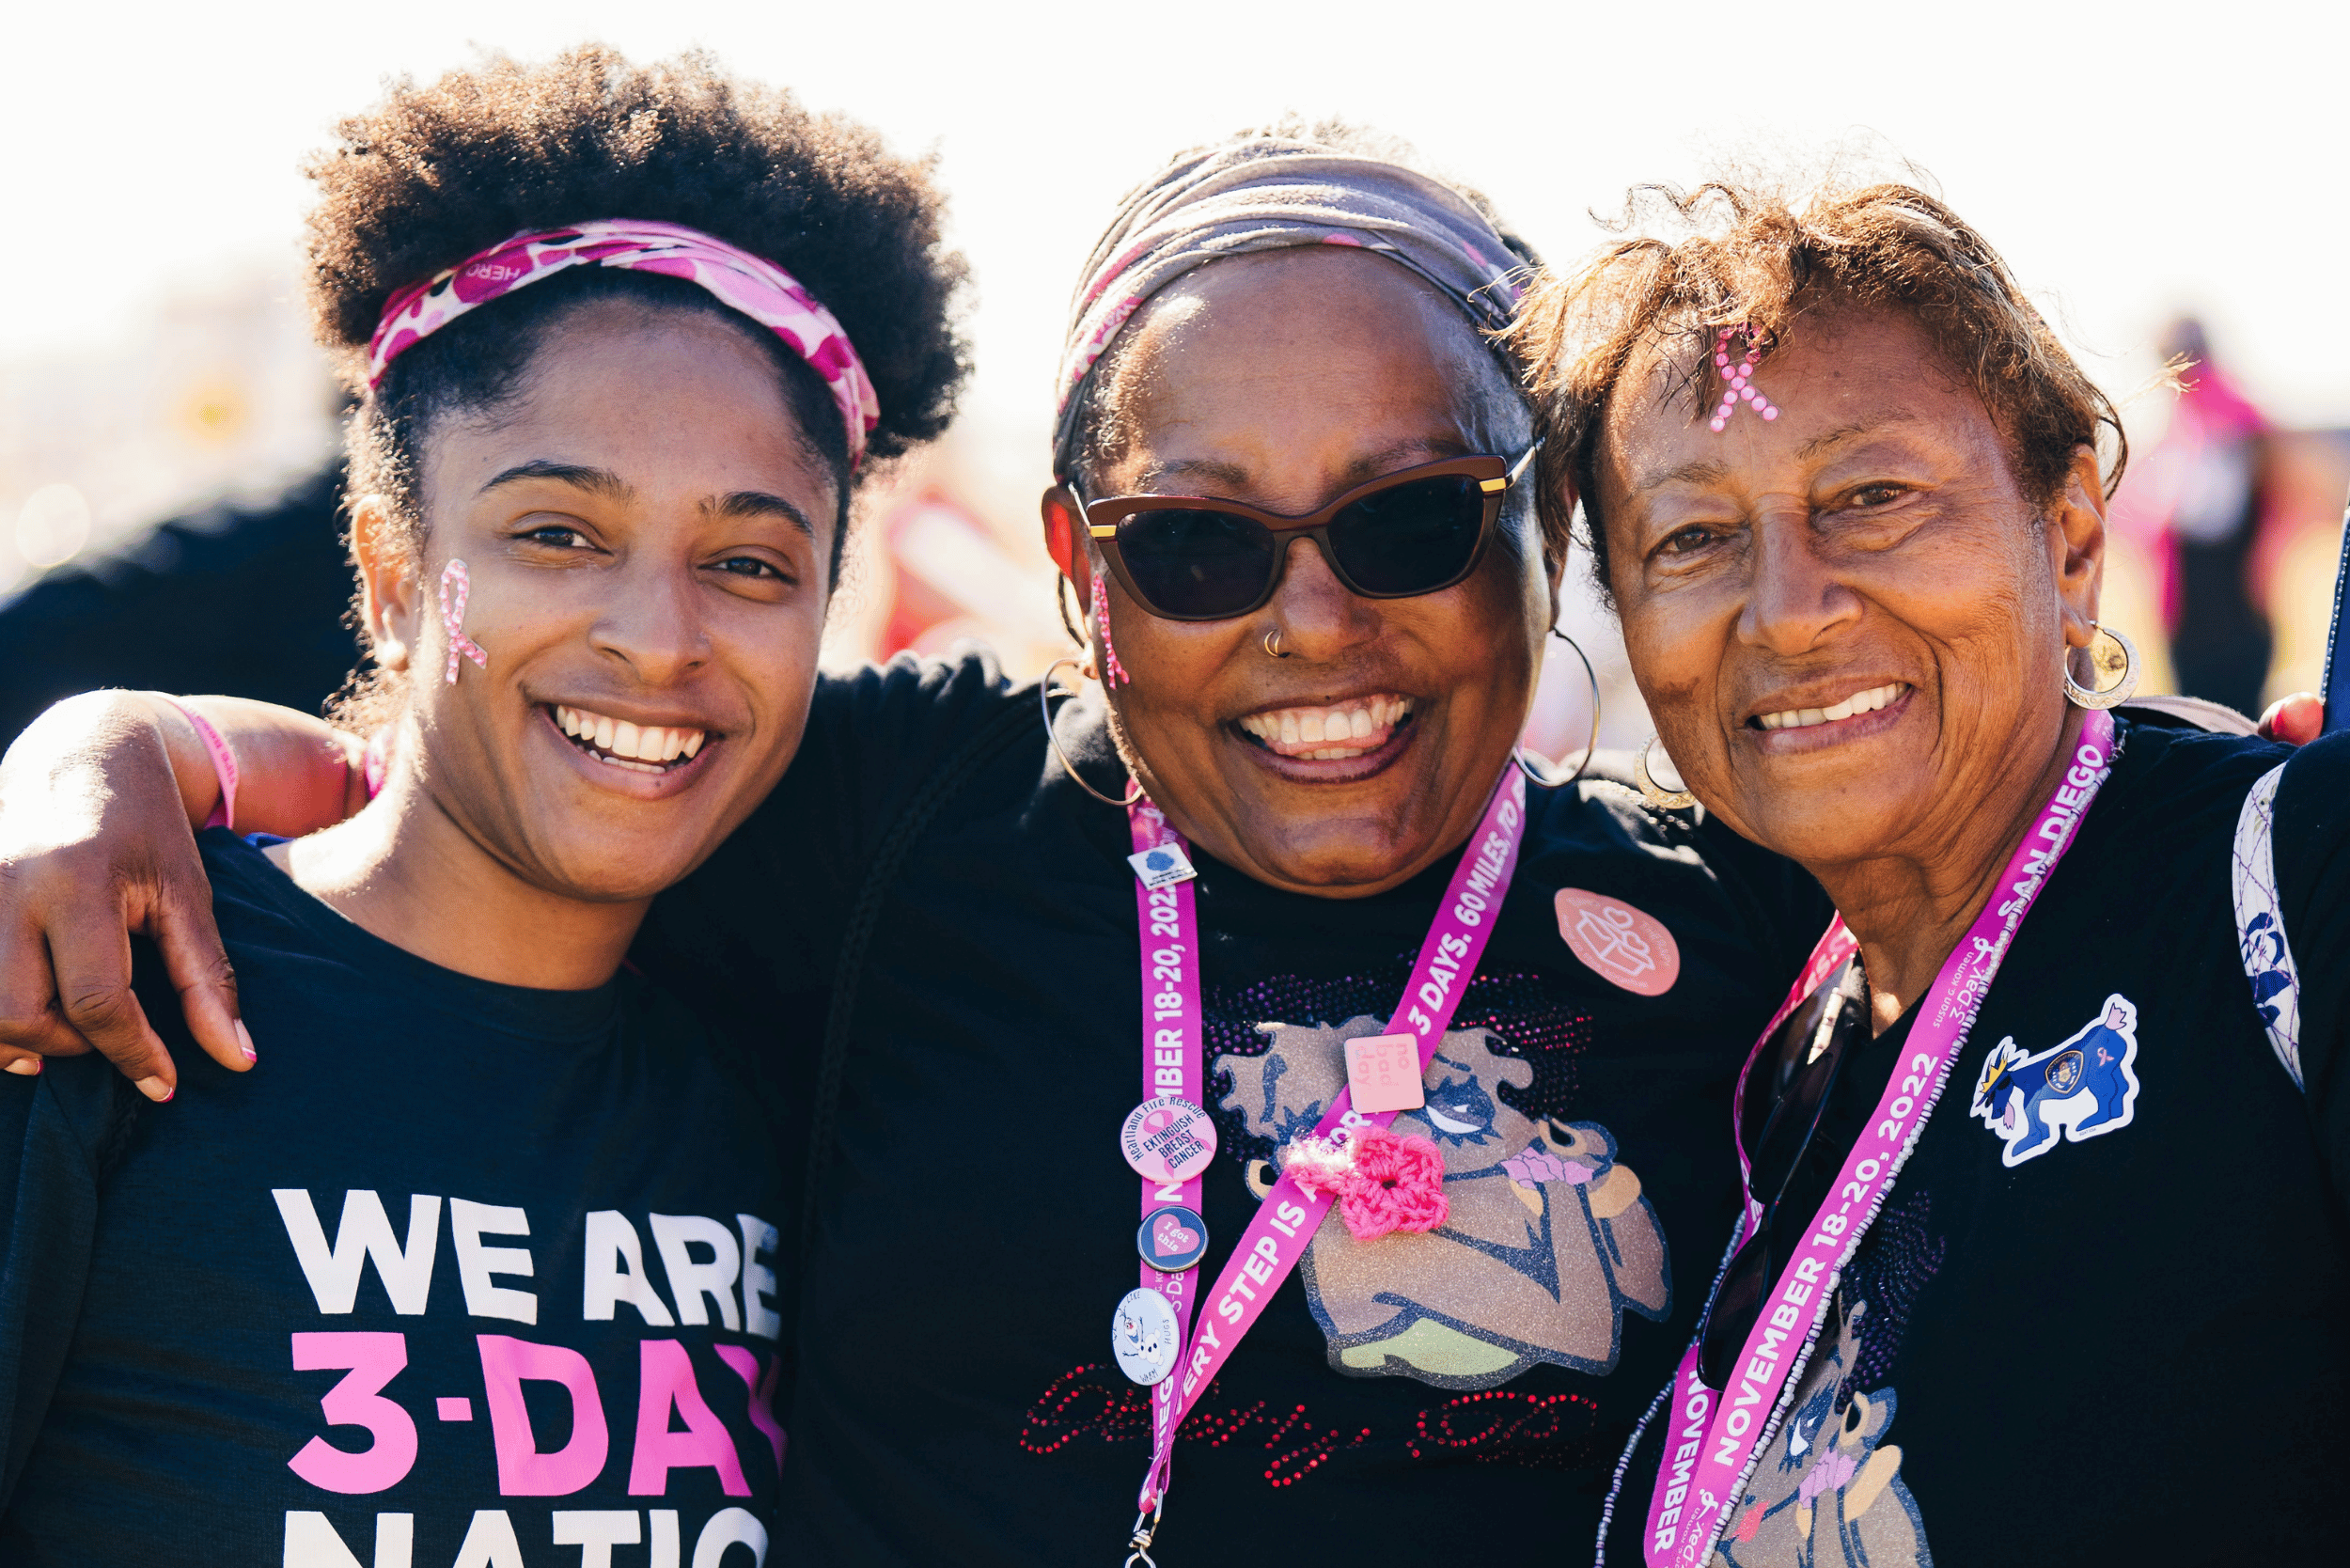 three smiling women with lanyards and t-shirts from a fundraising event